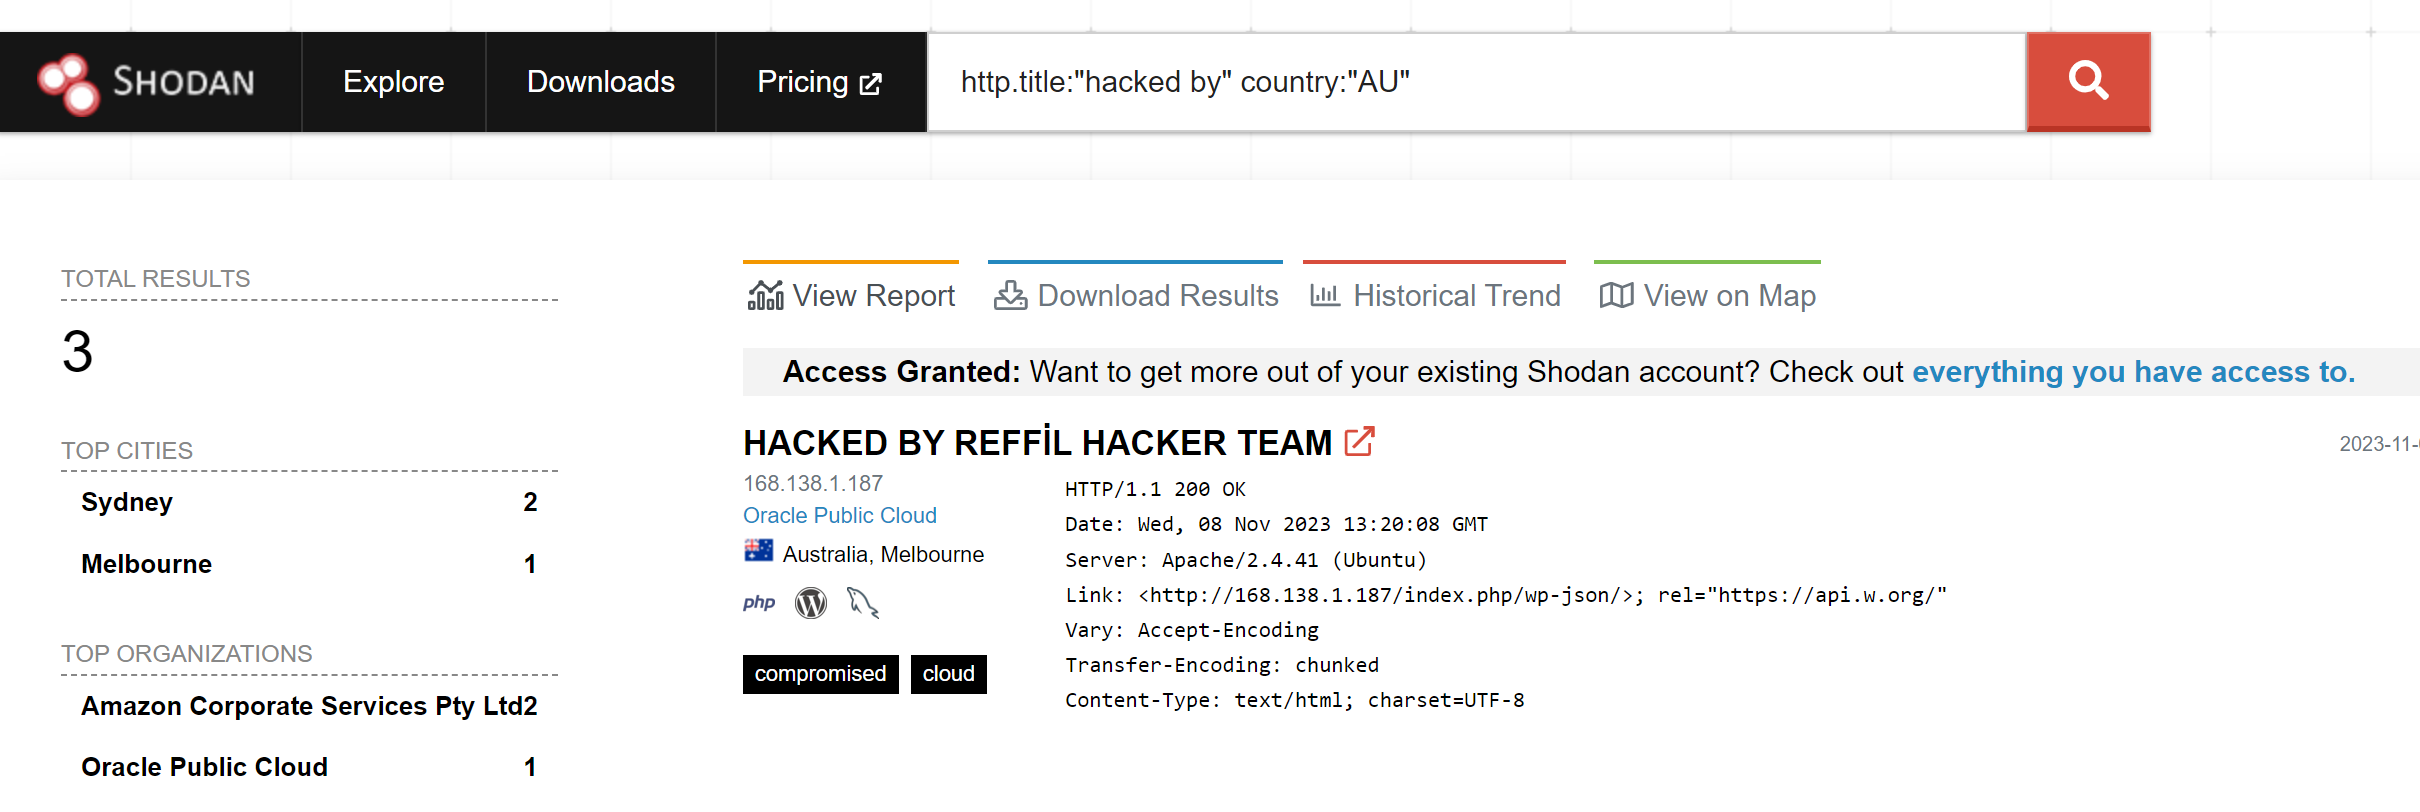 http.title:&ldquo;hacked by&rdquo; country:&ldquo;AU&rdquo;